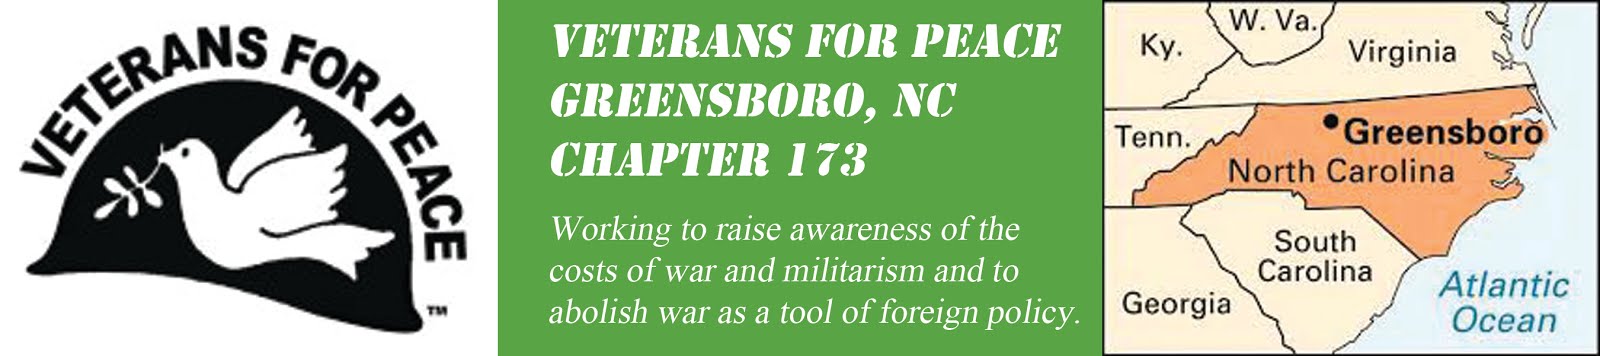 Veterans For Peace: North Carolina Triad Chapter 173 